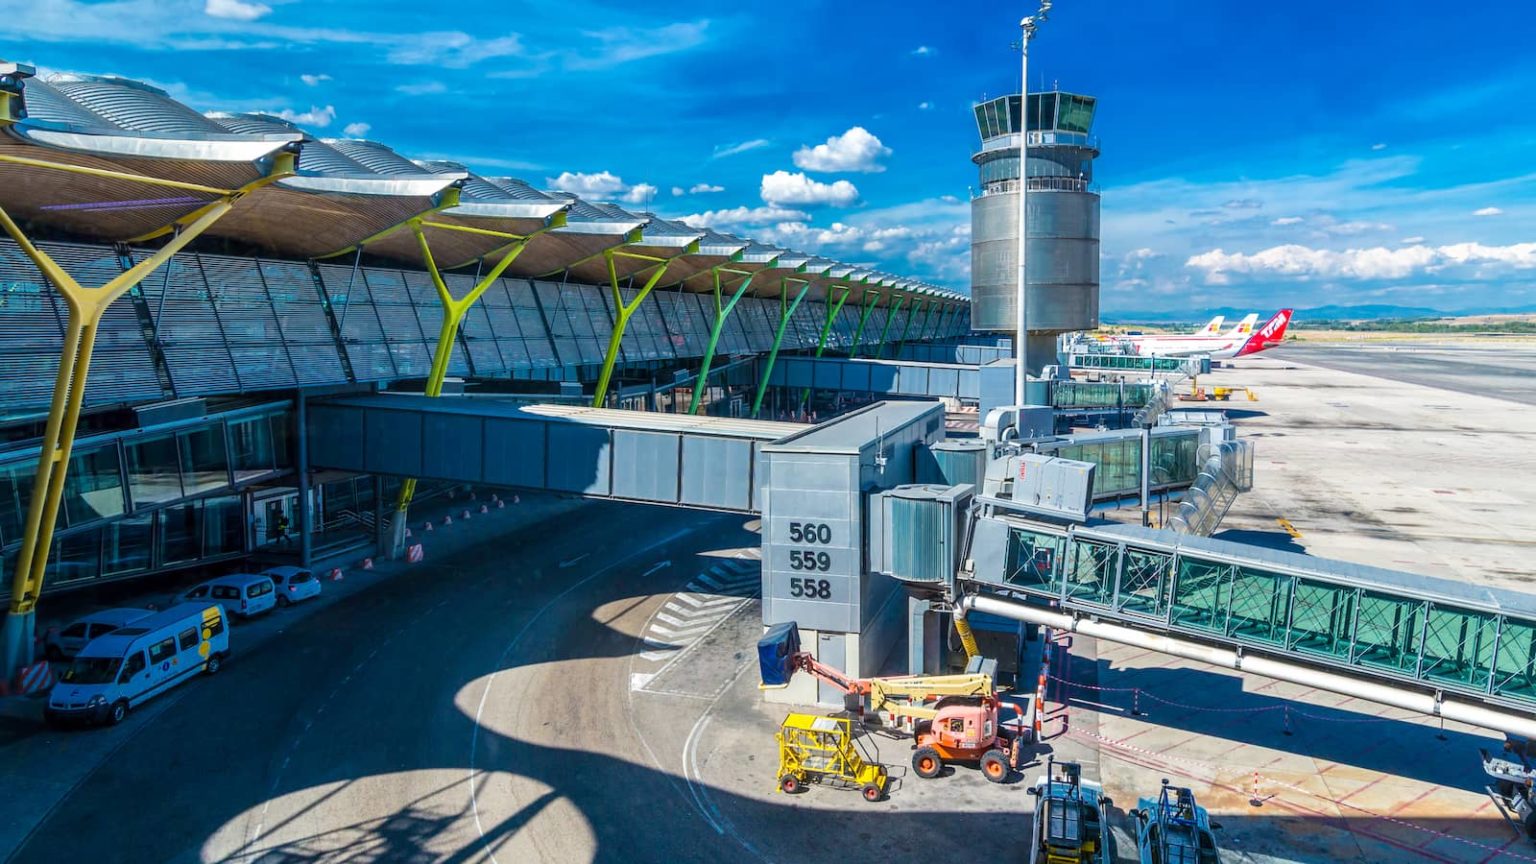 what is the best option to get from madrid international airport to city center